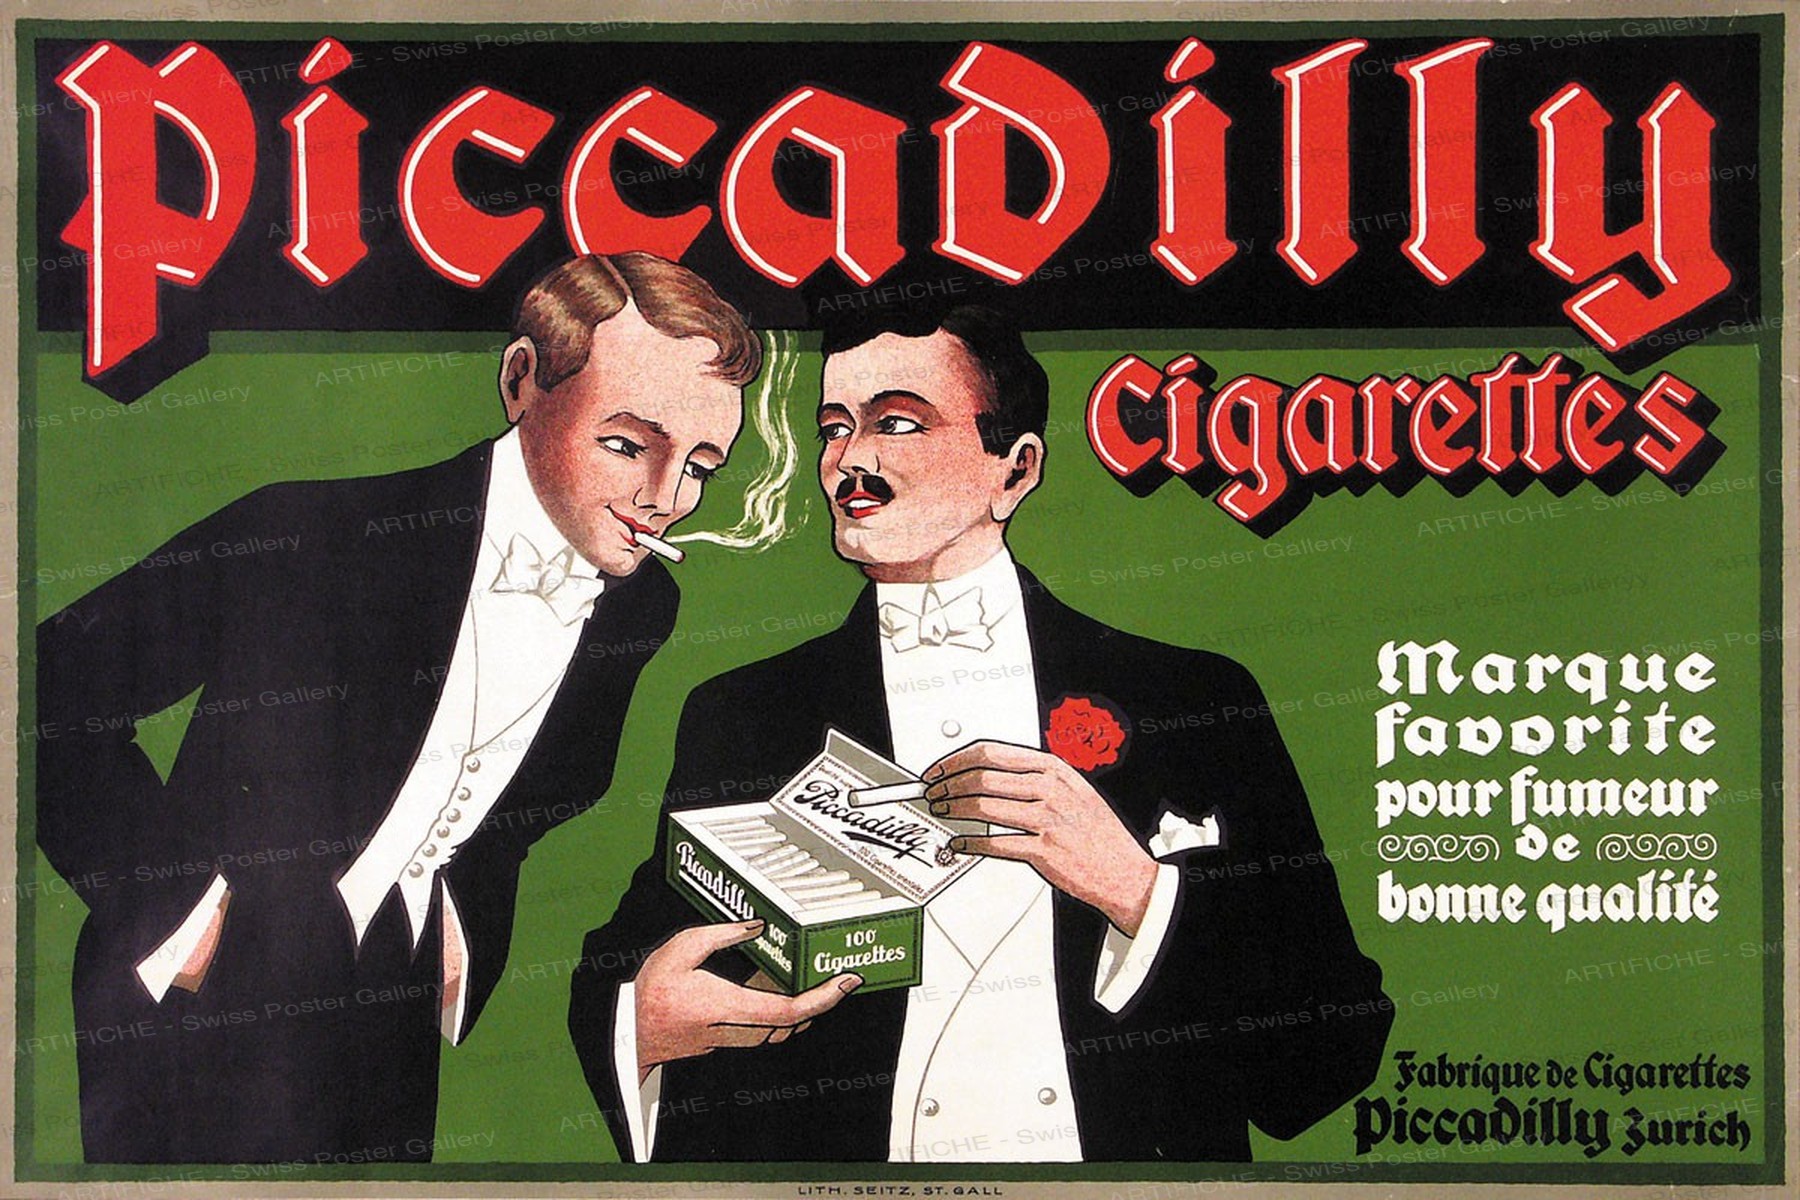 Piccadilly Cigarettes, Artist unknown